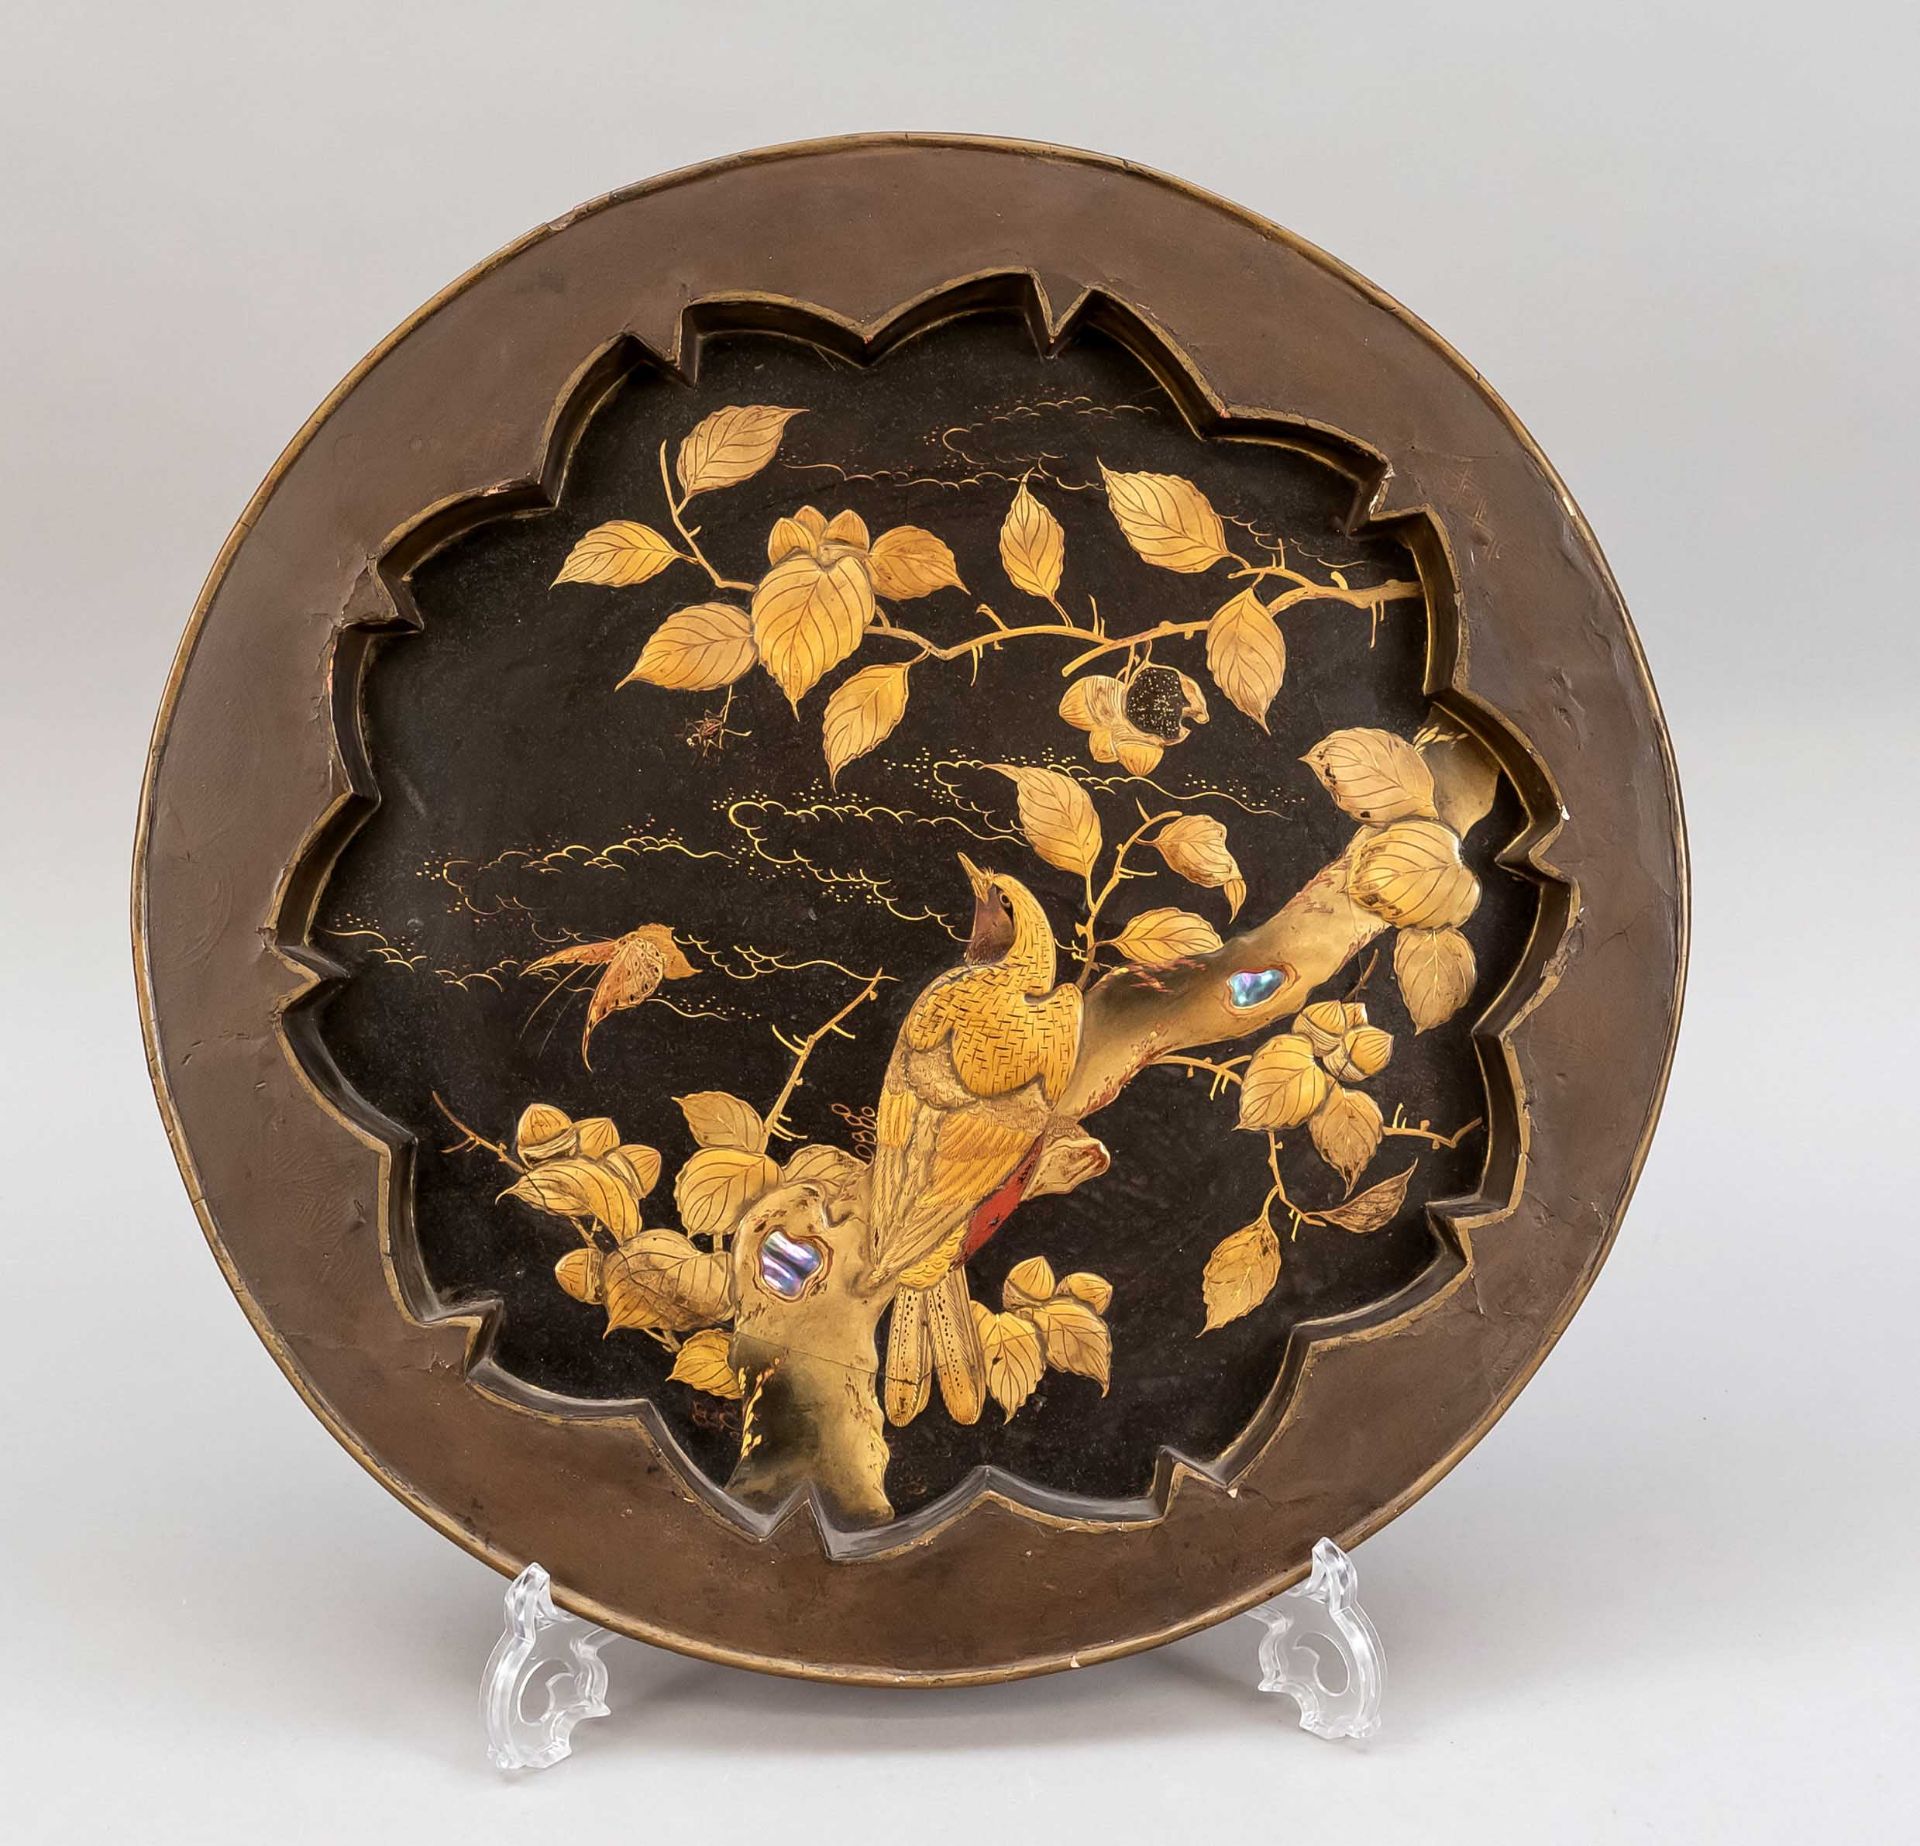 Lacquer tray, Japan, around 1900 (Meiji), round with matching curved recess. Decorated in maki-e